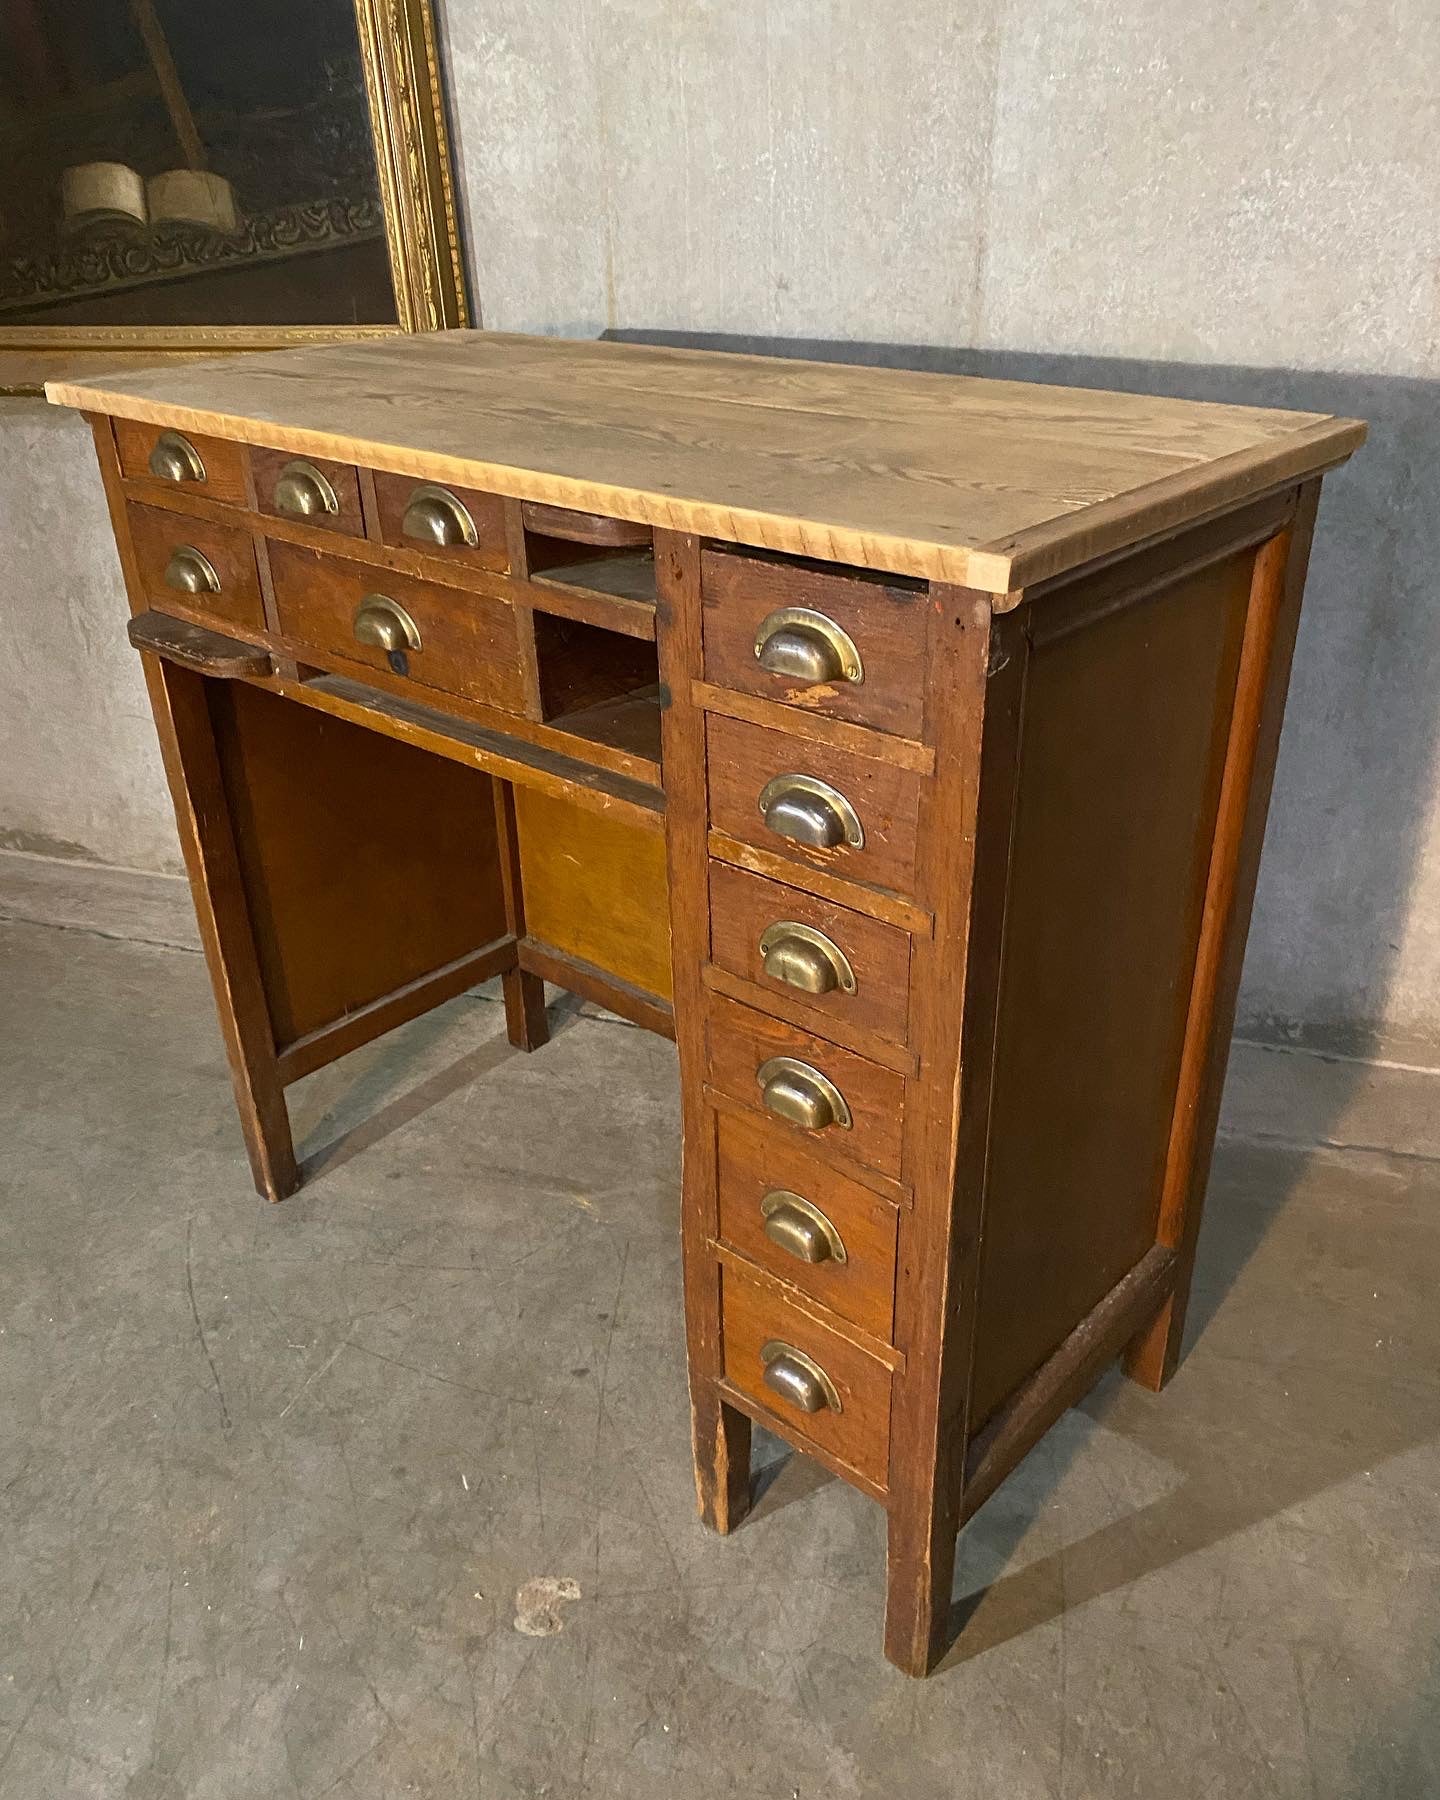 1920 original watchmakers  jewellers desk from BIRKS  STORE Vancouver | Scott Landon Antiques and Interiors.